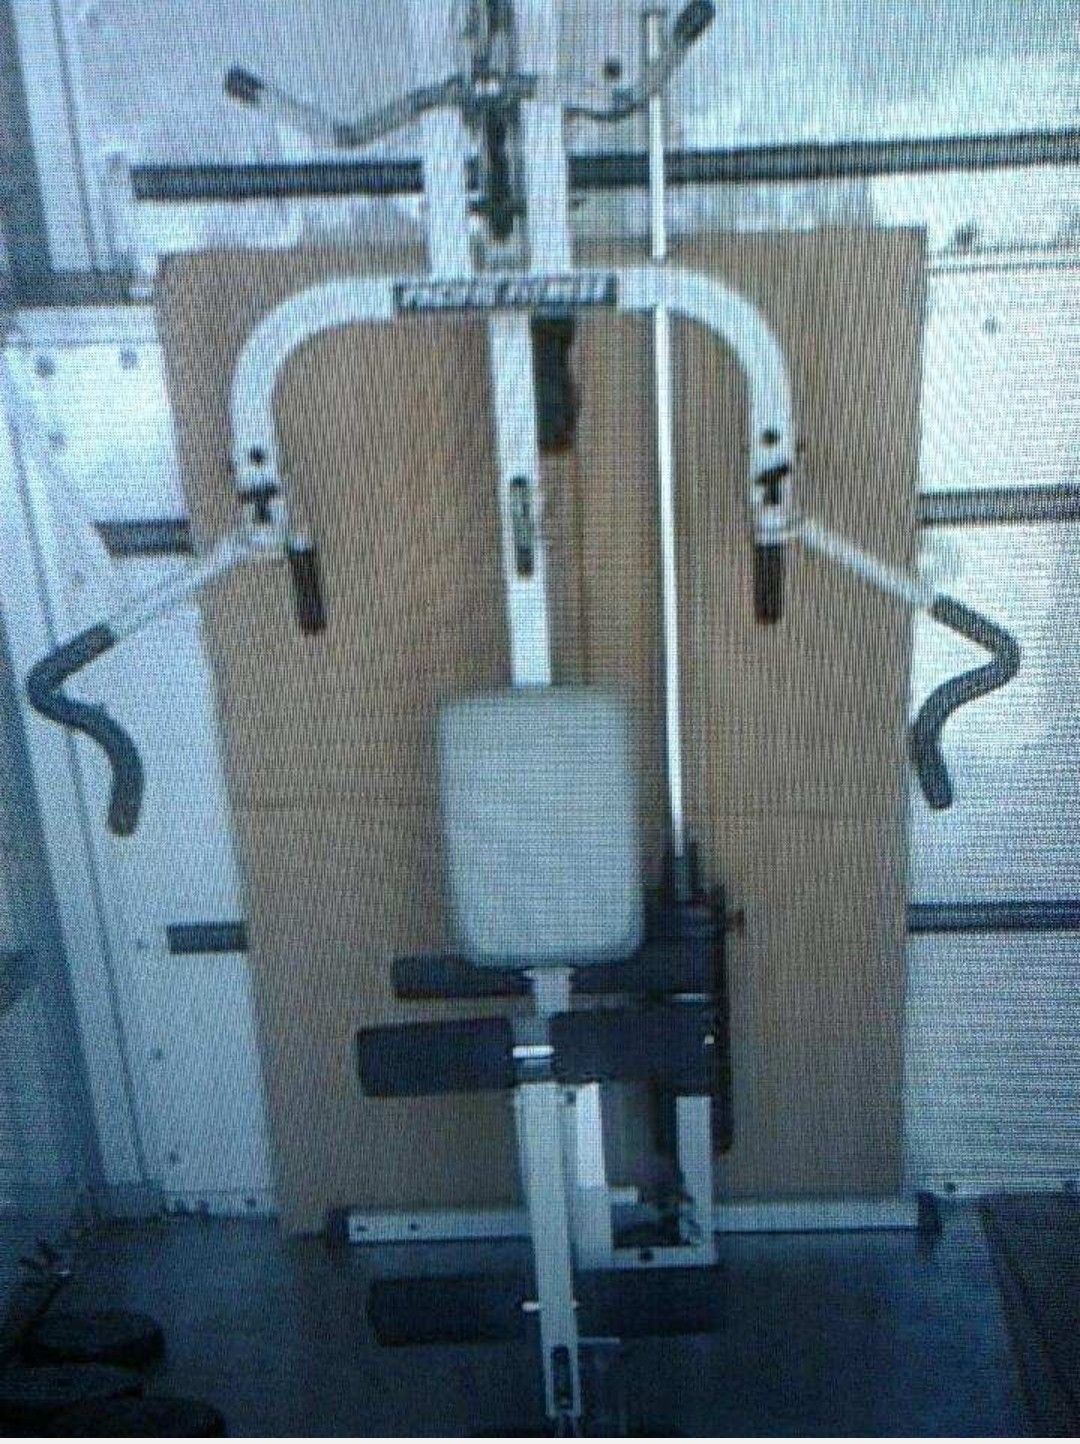 Home gym exercise machine (Pacific fitness) close a barbell and weights